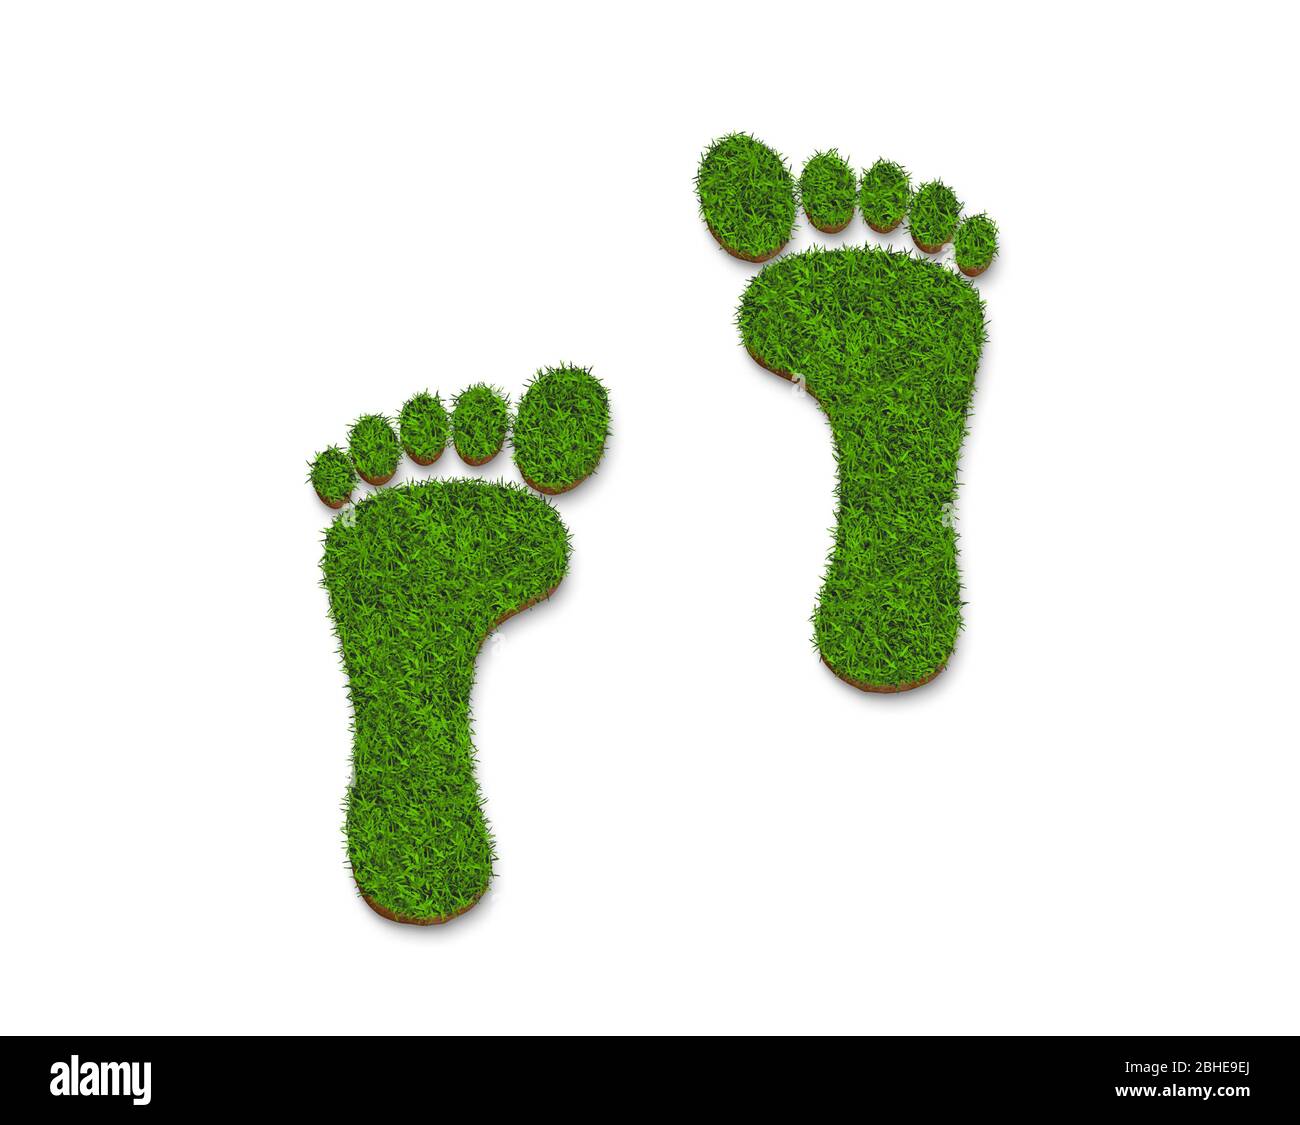 footprint icon logo from green grass texture isolated on white background for Recycling and Ecology concept design. 3D illustration. Stock Photo